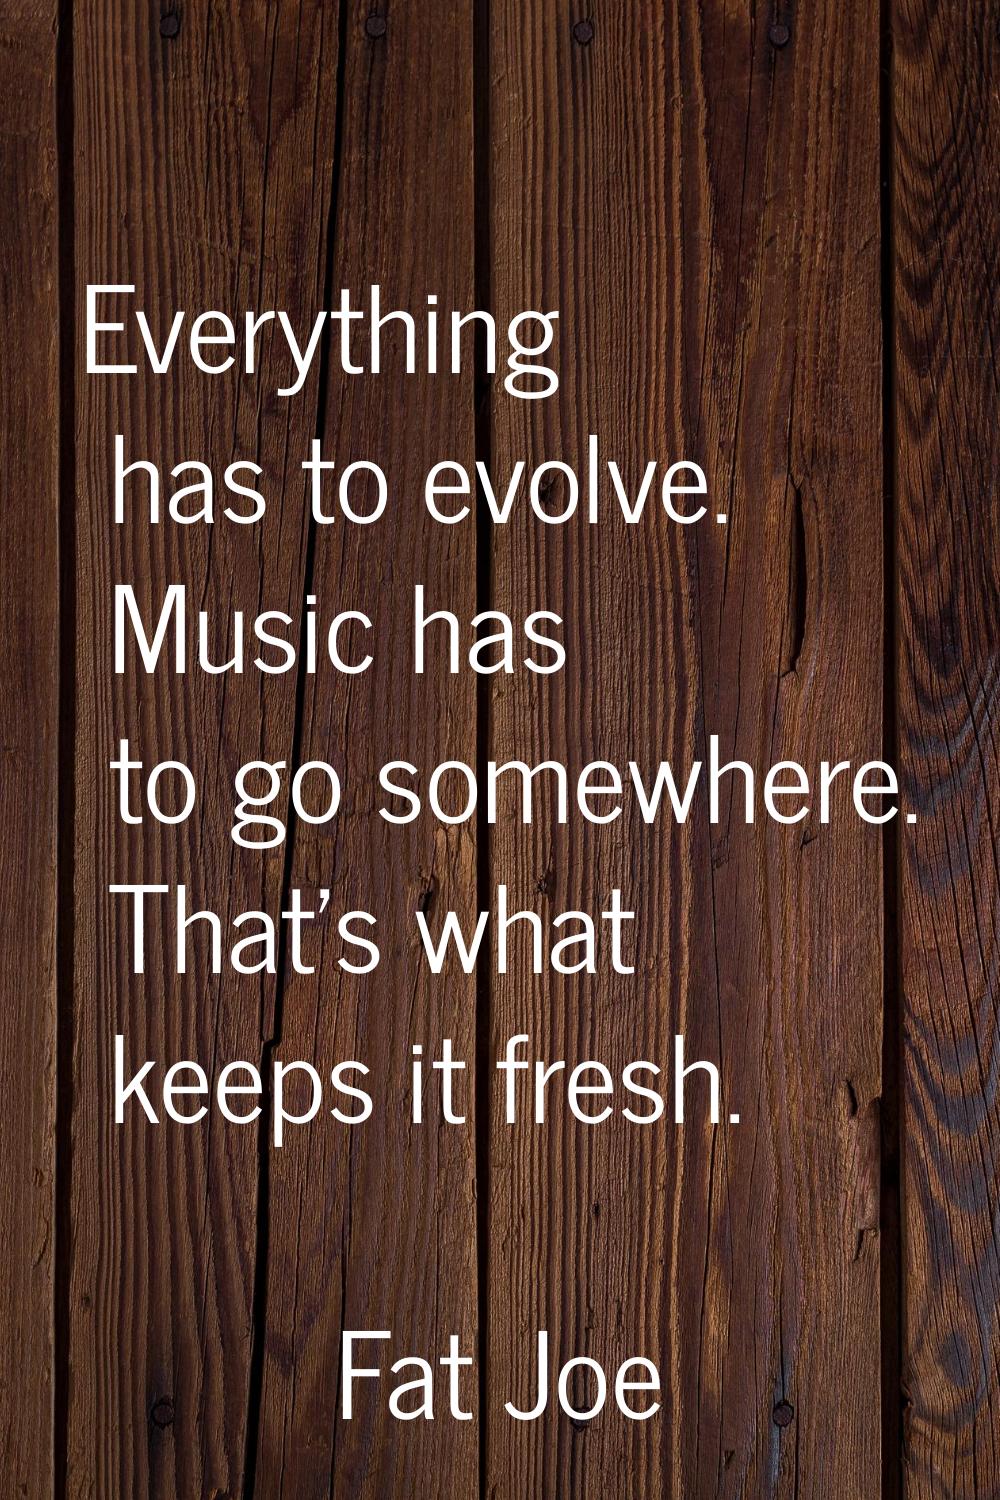 Everything has to evolve. Music has to go somewhere. That's what keeps it fresh.